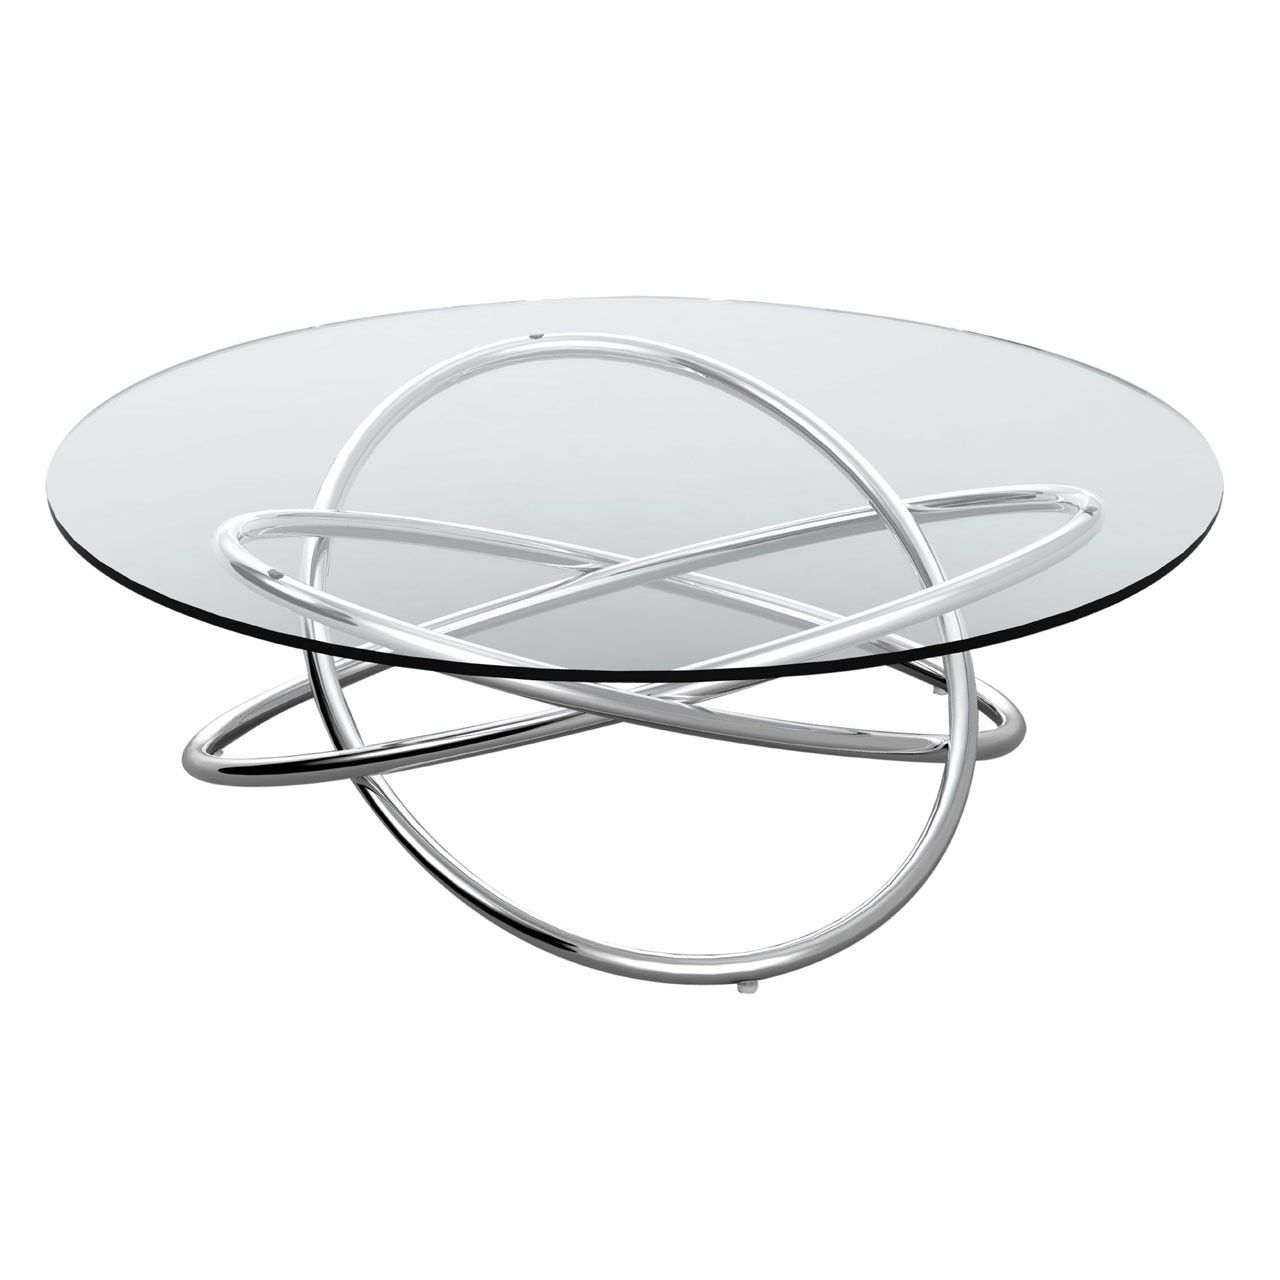 2019 Clear Glass Top Cocktail Tables With Regard To Orb Stainless Steel And Clear Tempered Glass Coffee Table (View 16 of 20)